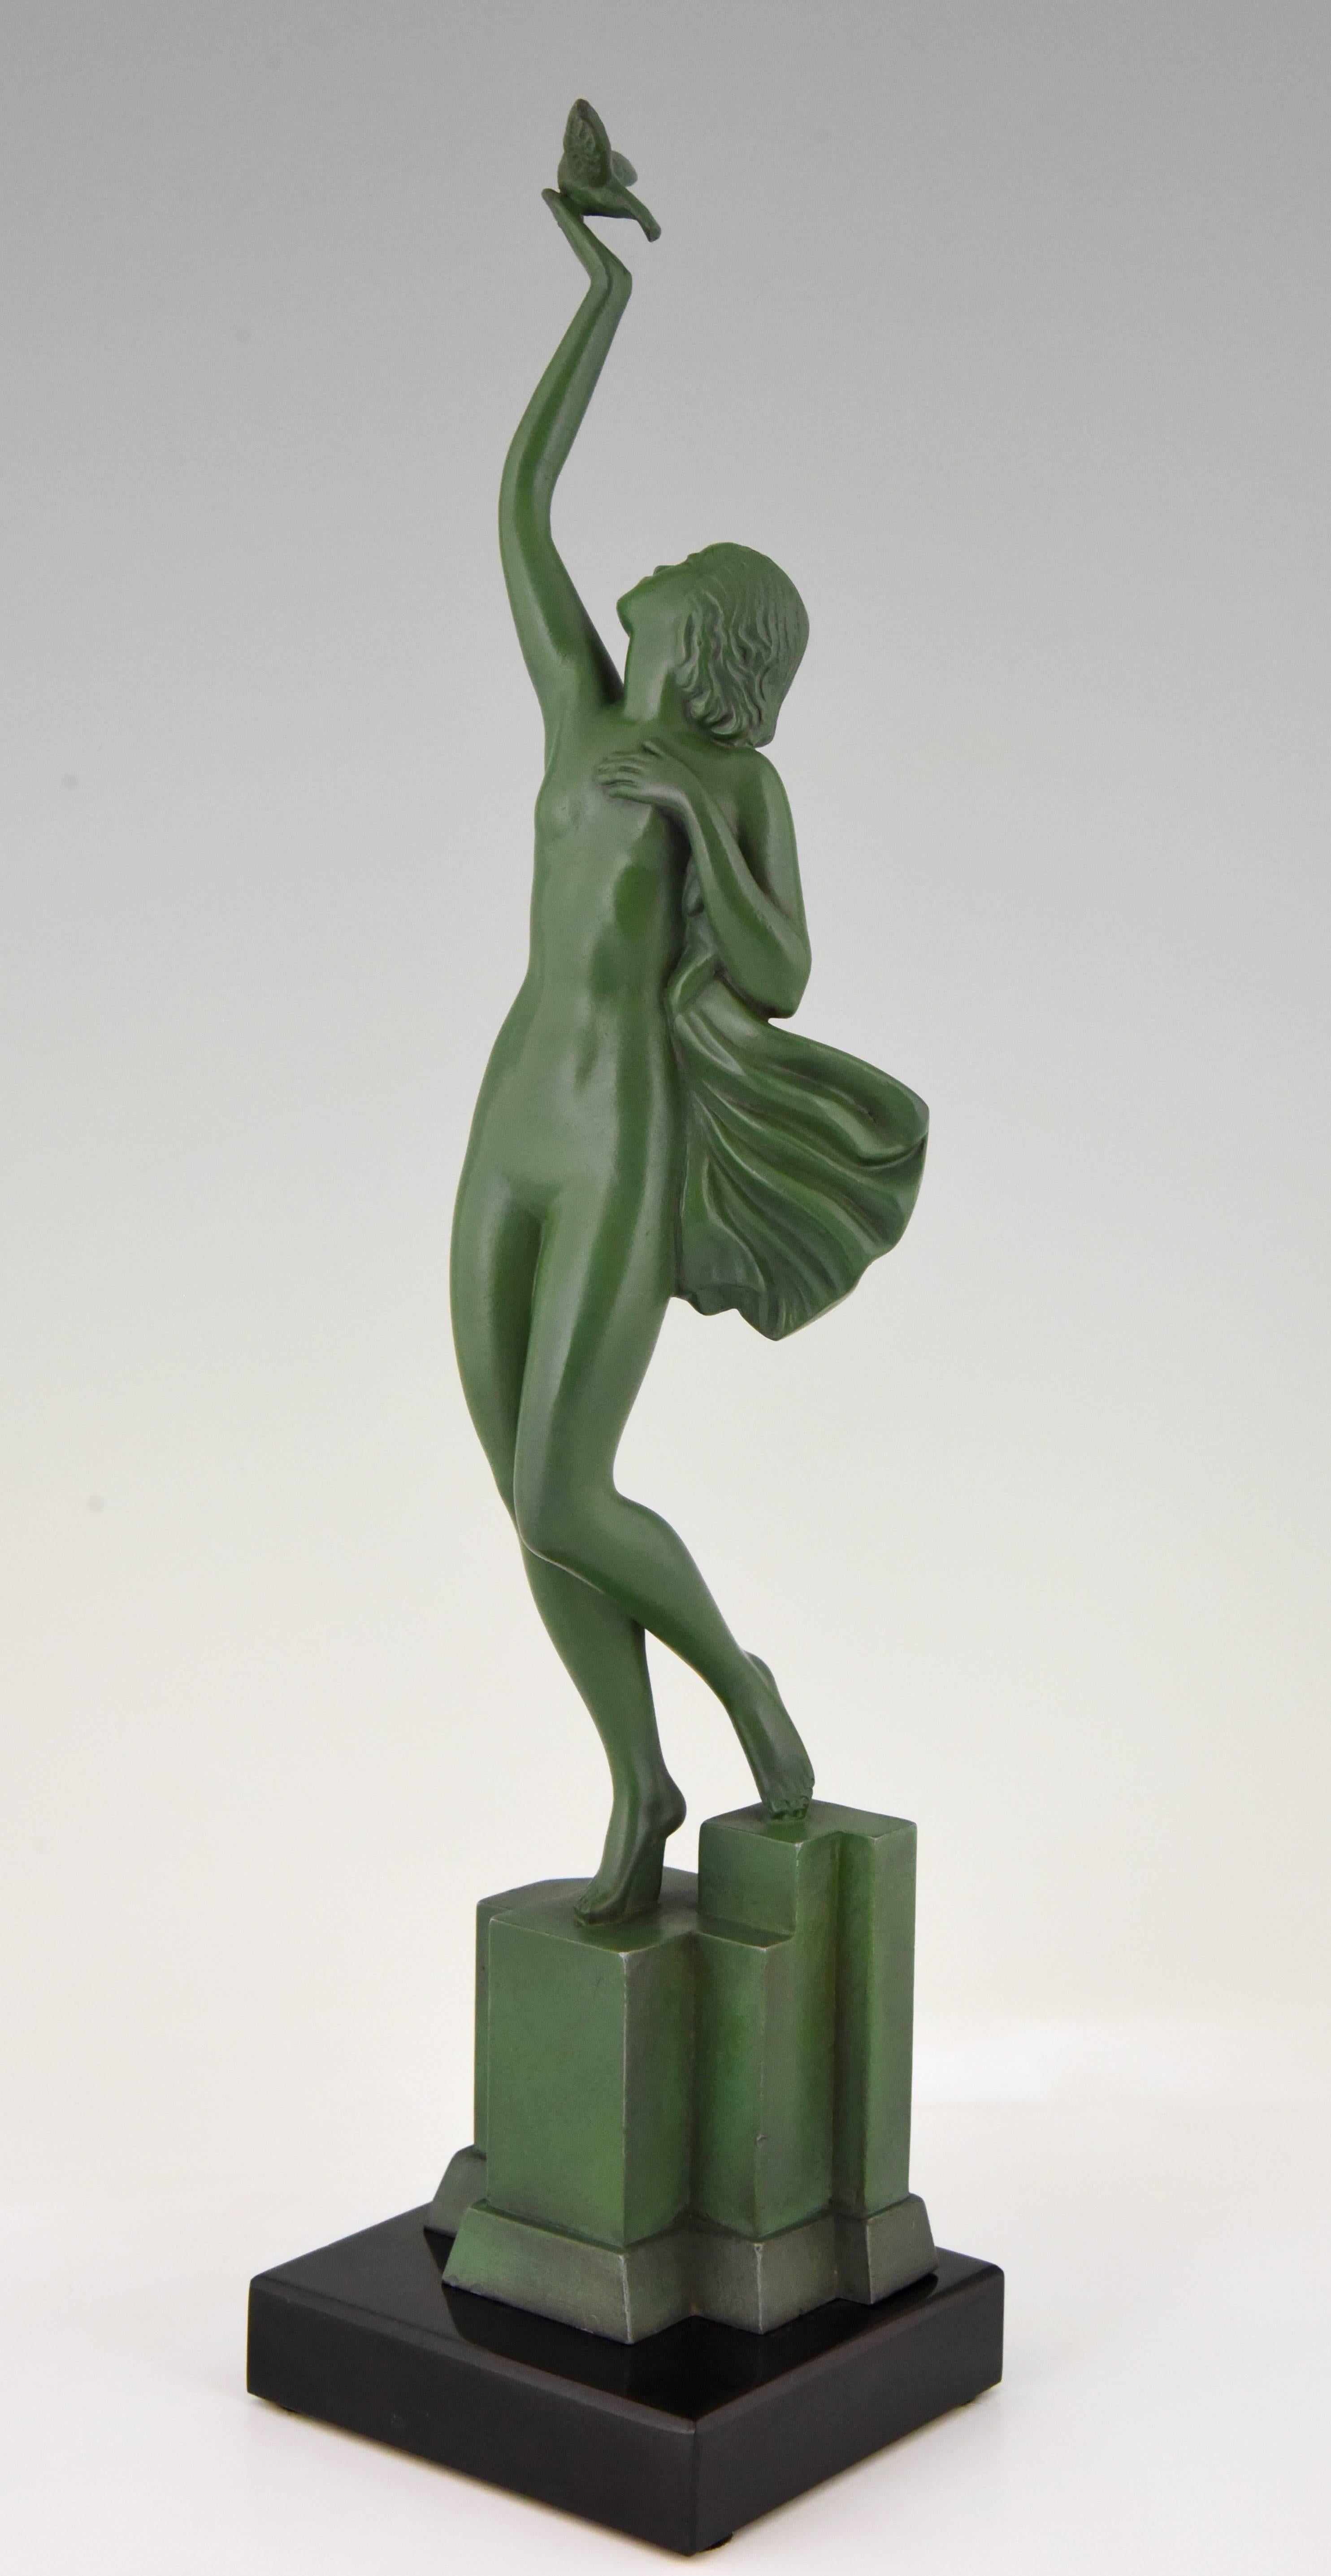 Message of love, Art Deco sculpture of a nude with dove.
Fayral, Pierre Le Faguays
Signature/ marks: Fayral
Style: Art Deco
Date: 1930
Material: Art metal with green patina. Belgian black marble base.
Origin: France
Size: H 34.5 cm x L 8.5 cm